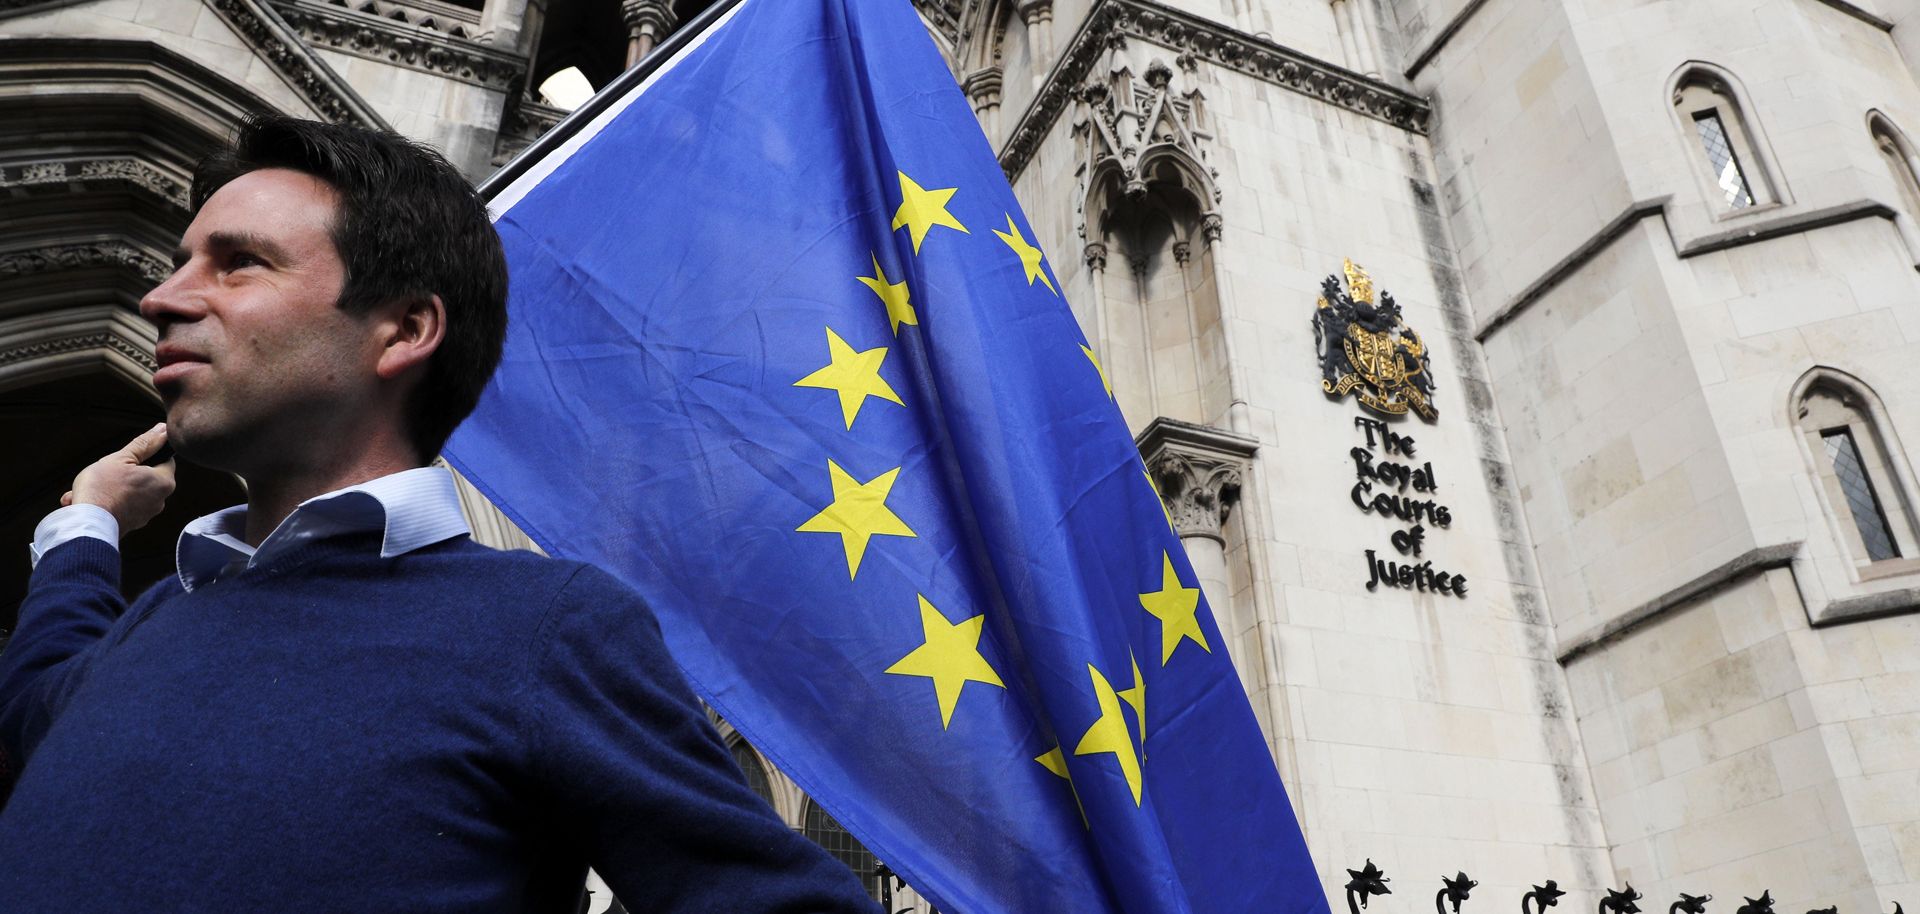 Pro-European Union supporter Phil Jones holds an EU flag outside the entrance to the Royal Courts of Justice, the United Kingdom's High Court, in London on Oct. 13, 2016.